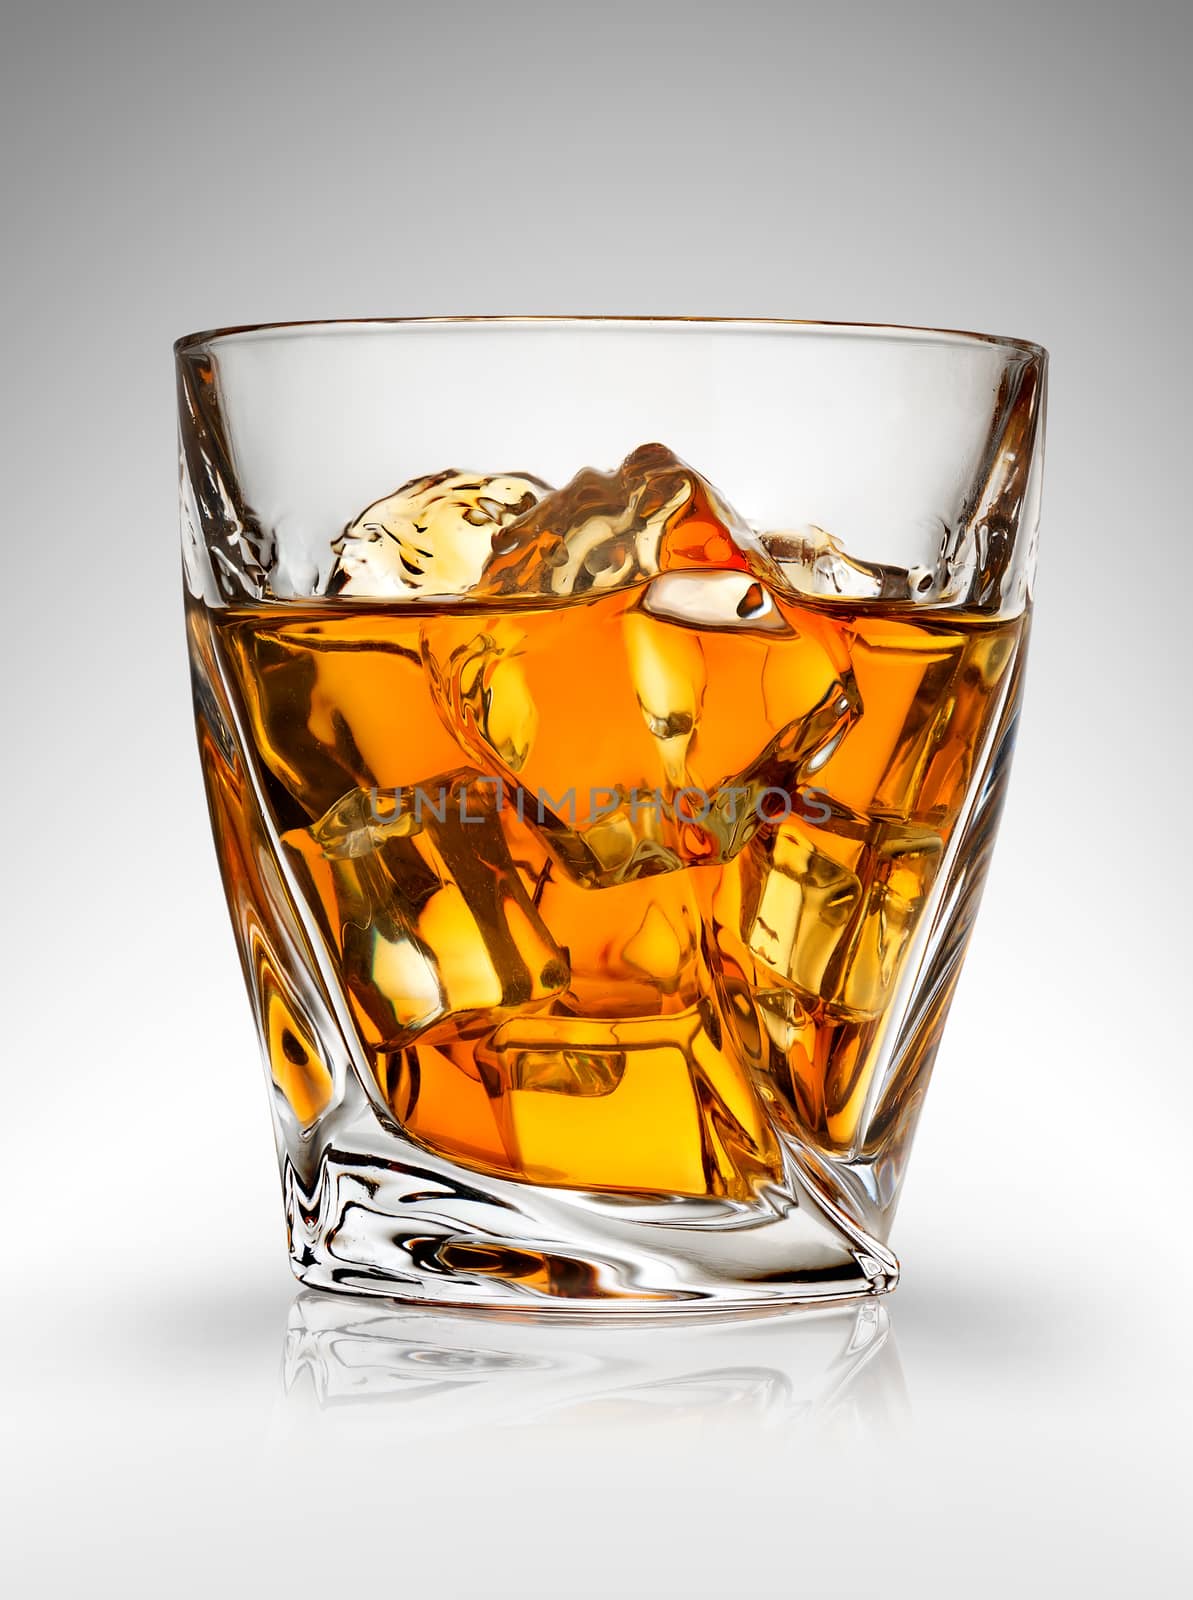 Glass of whiskey on a gray background